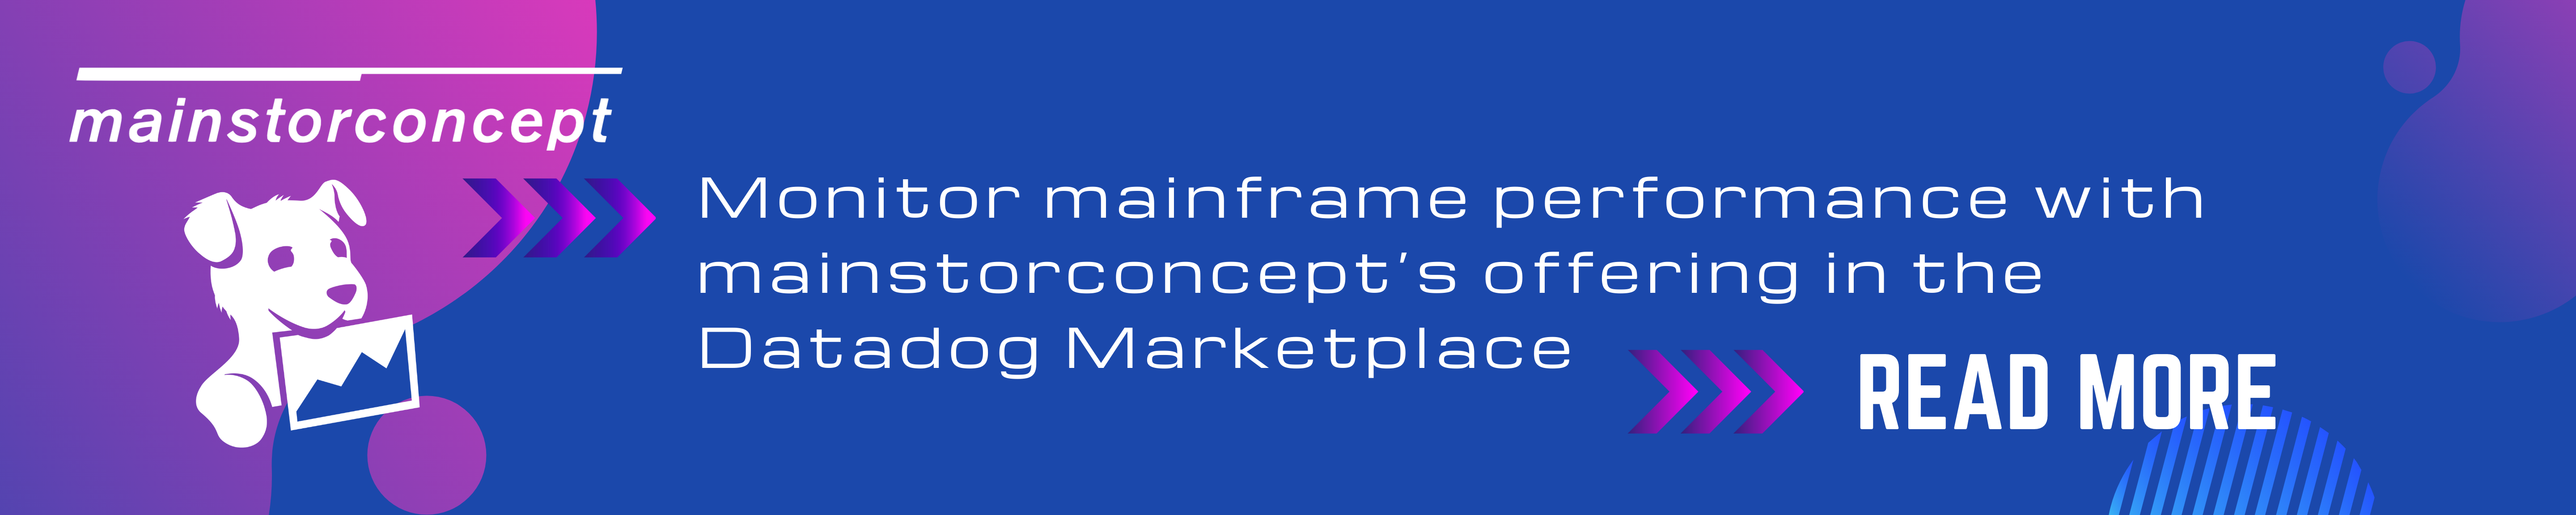 Monitor mainframe performance with mainstorconcept’s offering in the Datadog Marketplace